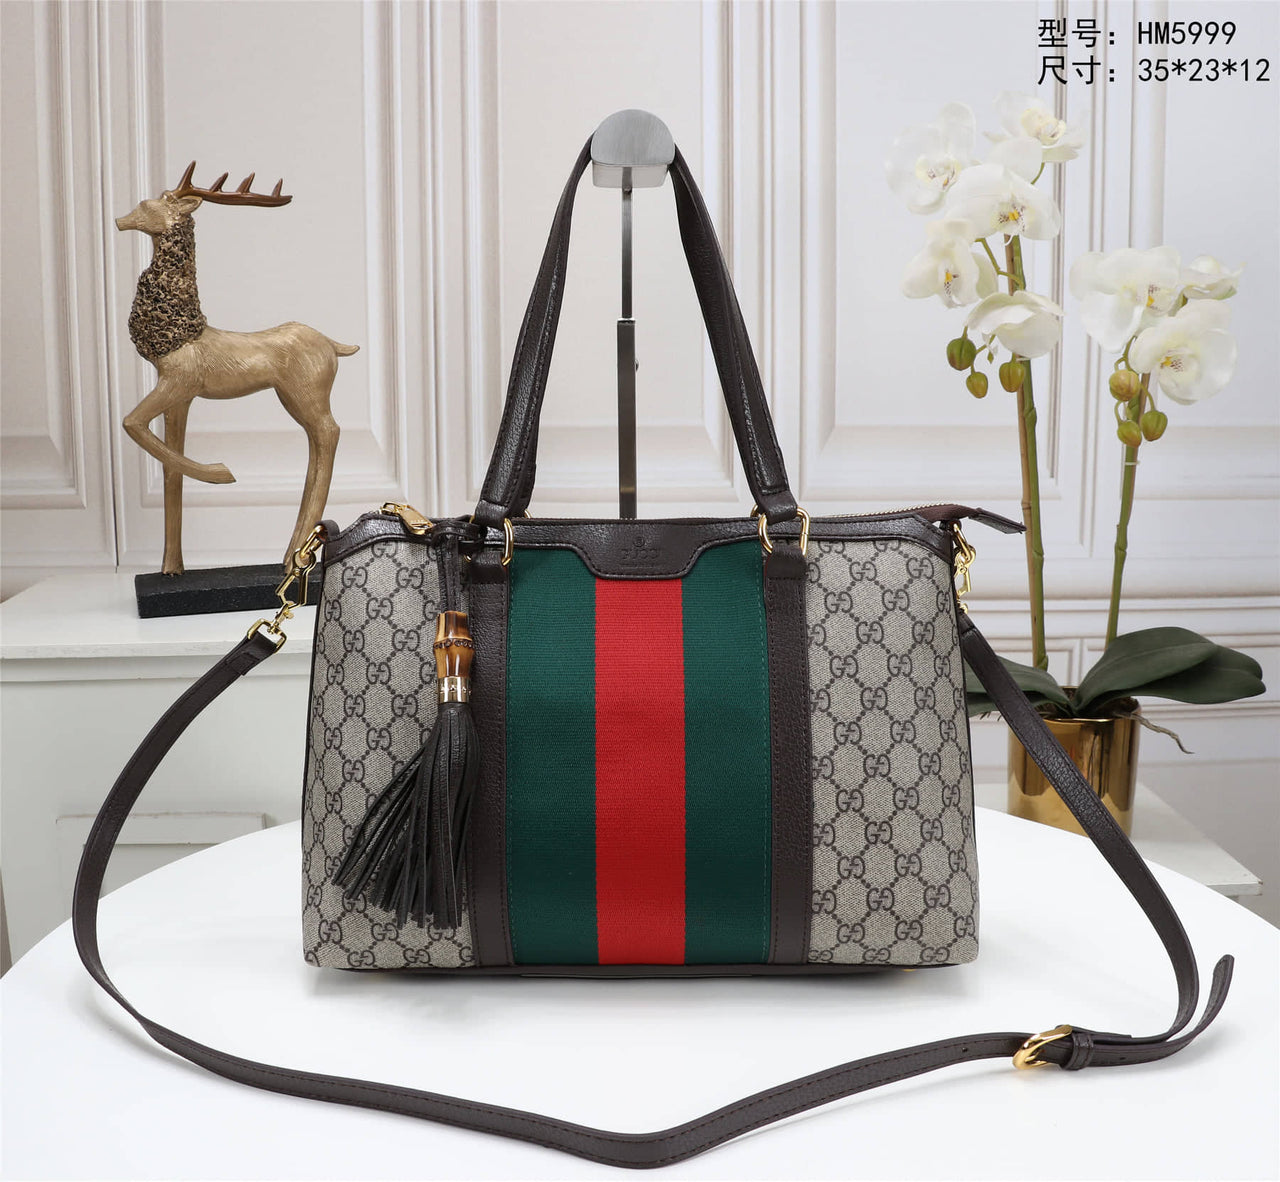 GG5999 Tote Bag with Sling